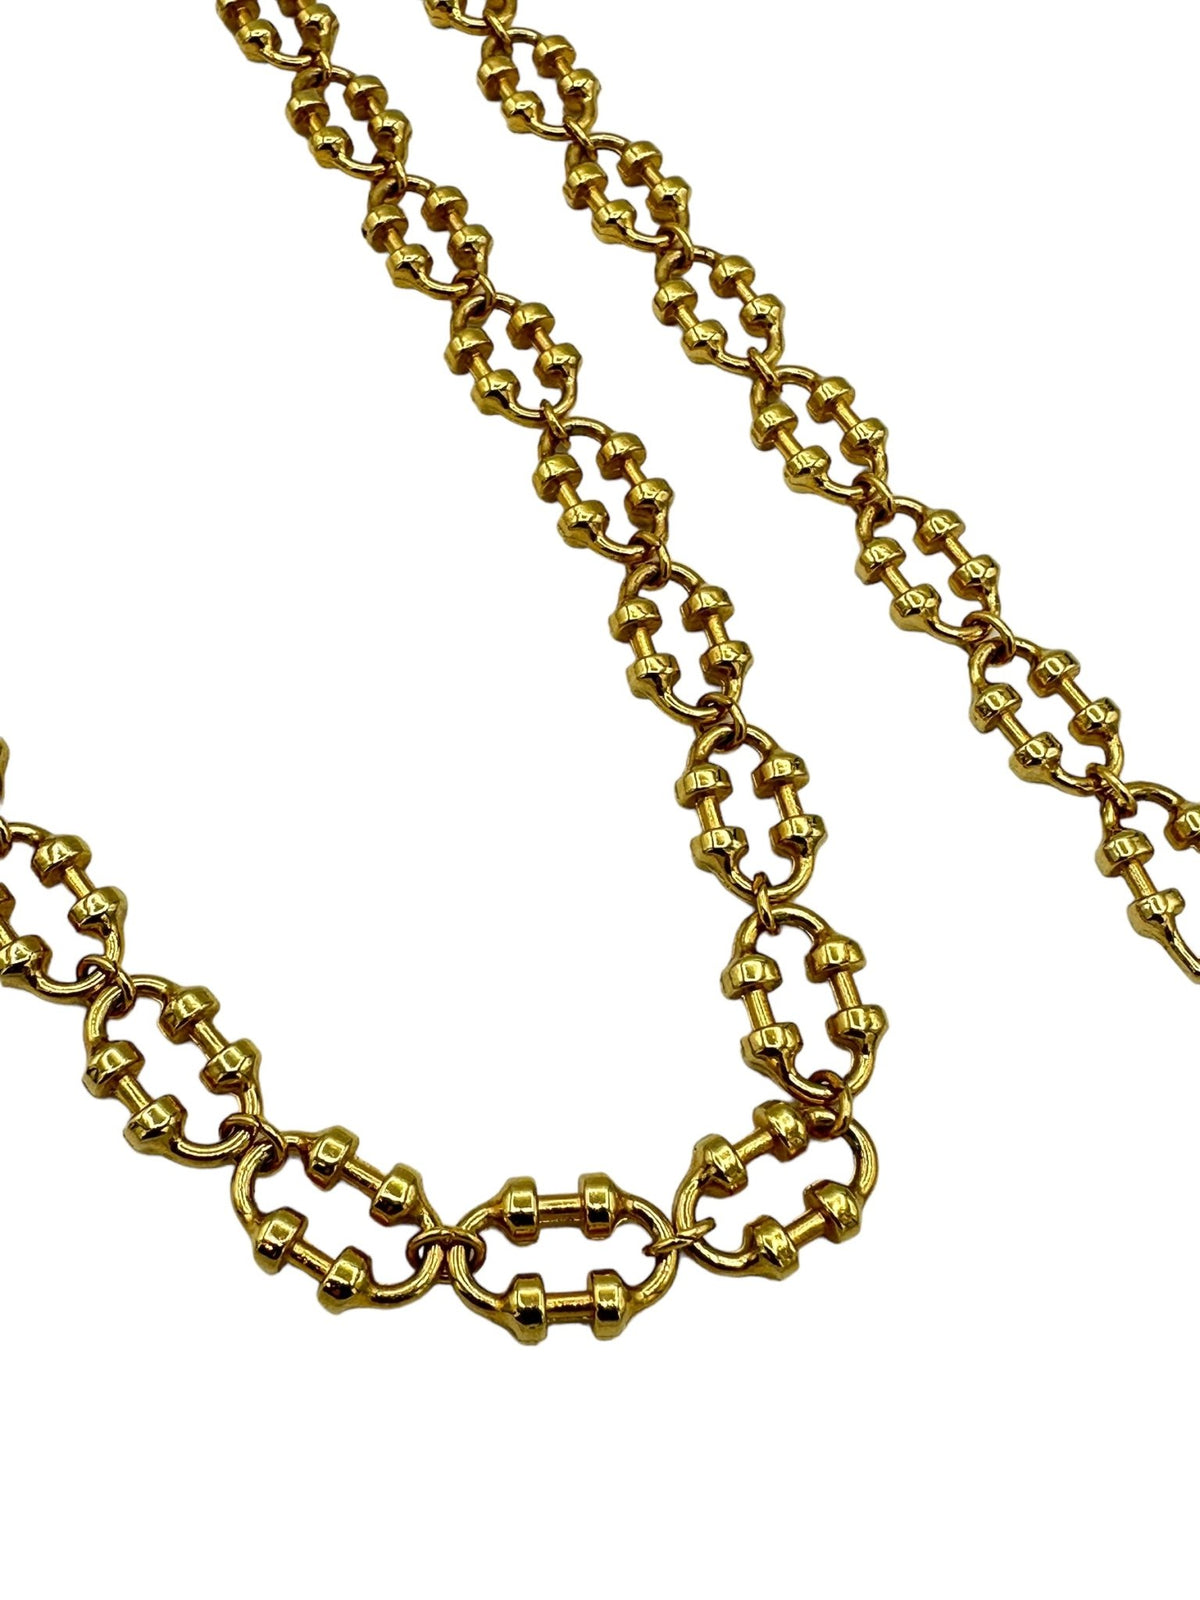 Avon Vintage Jewelry Set Gold Chain Convertible Set - 24 Wishes Vintage Jewelry